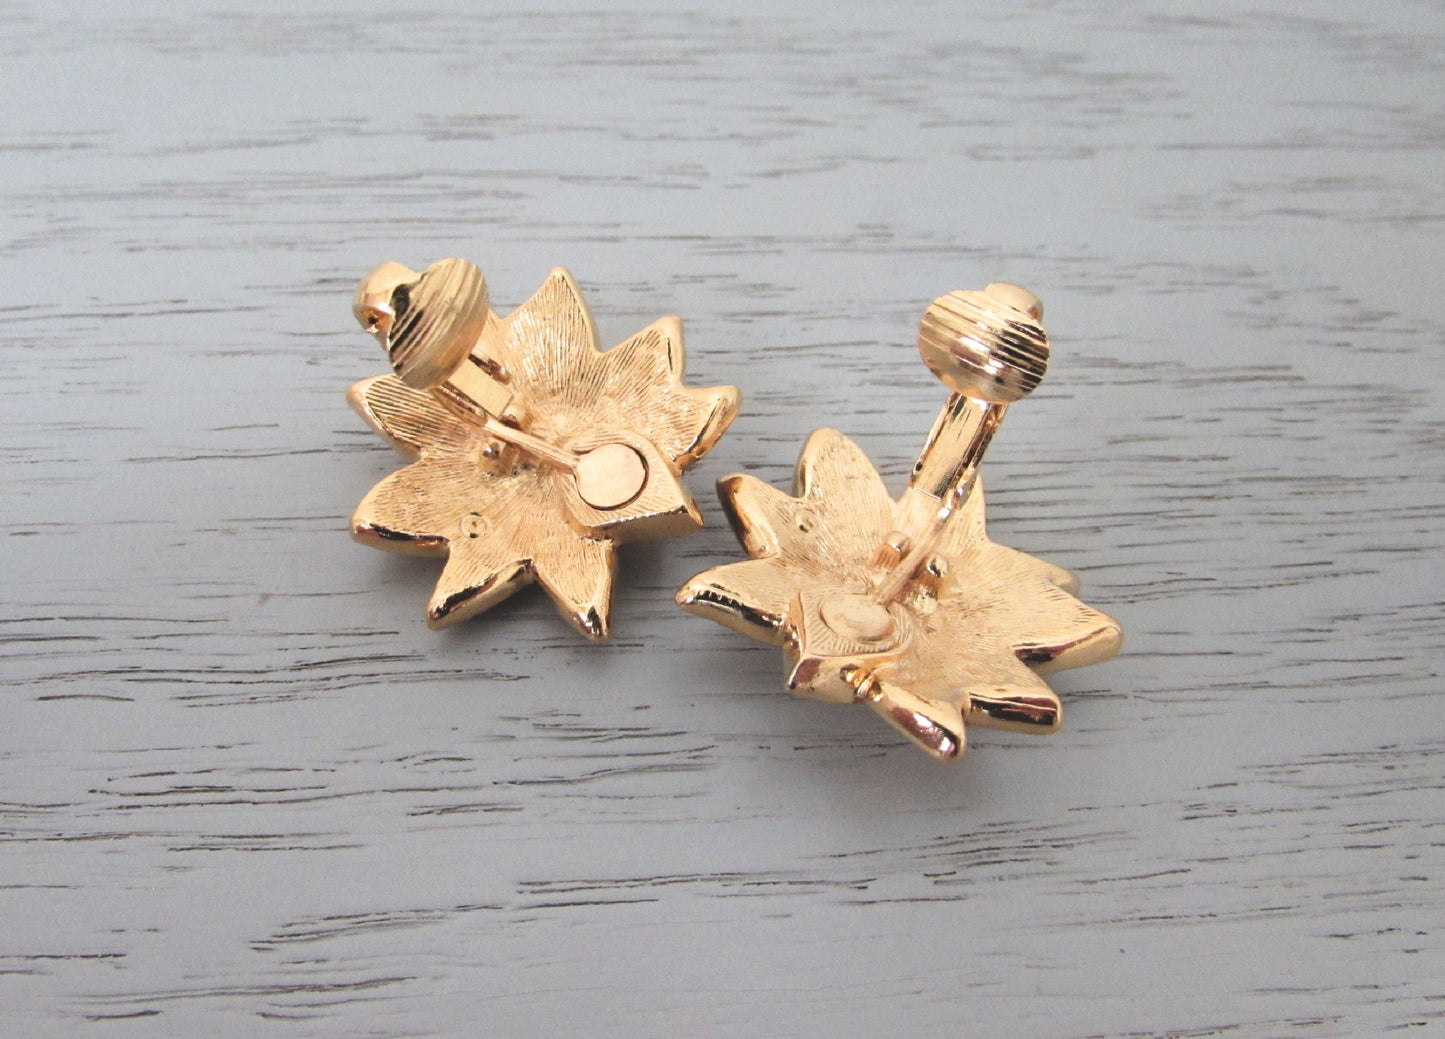 Vintage Enamel Flower Earrings, Yellow and Gold Glitter Floral Clip-On Statement Earrings, Big Vintage Earrings, Iridescent Glitter Earrings